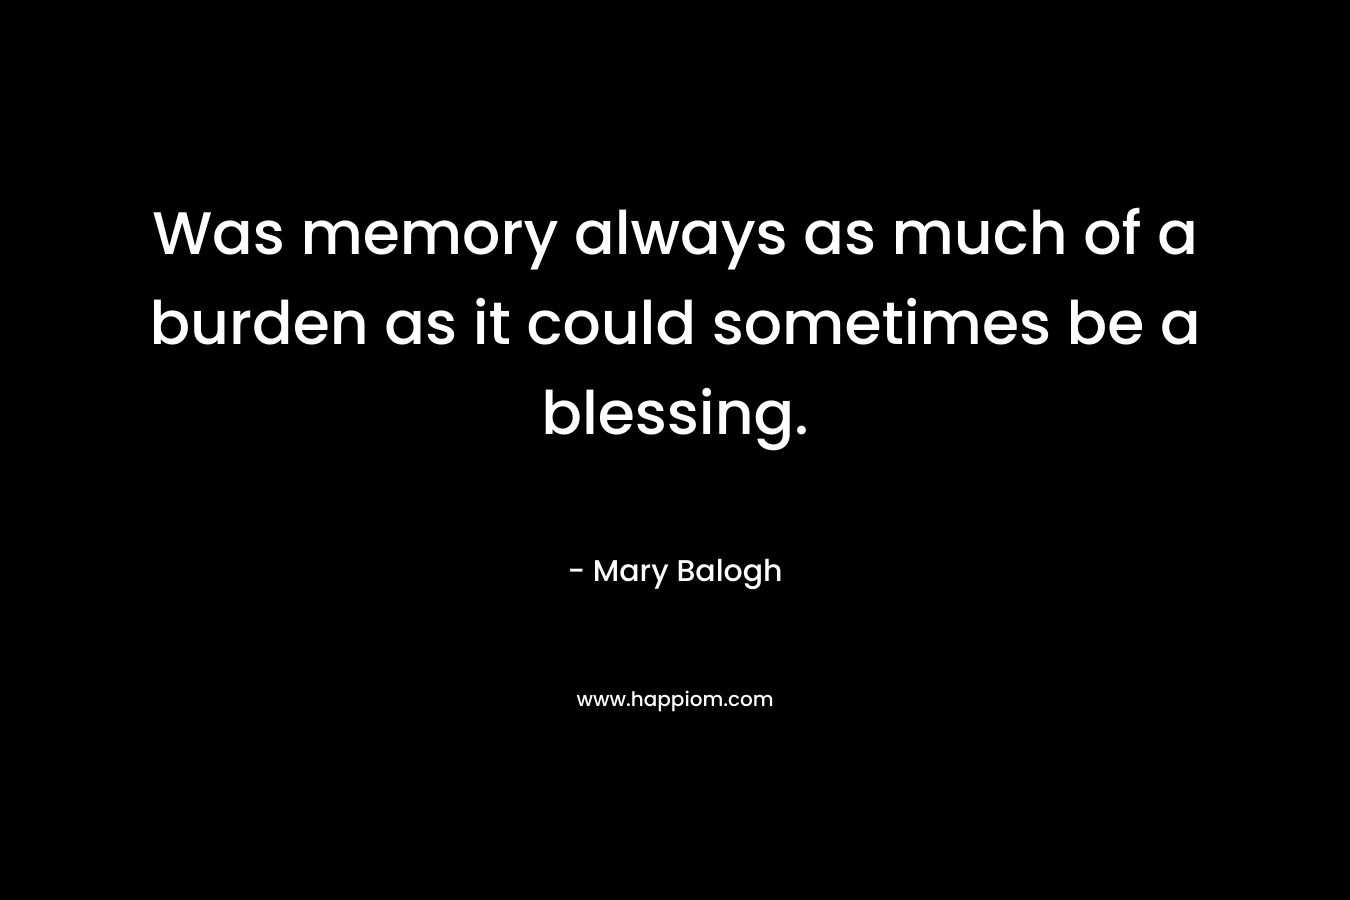 Was memory always as much of a burden as it could sometimes be a blessing.